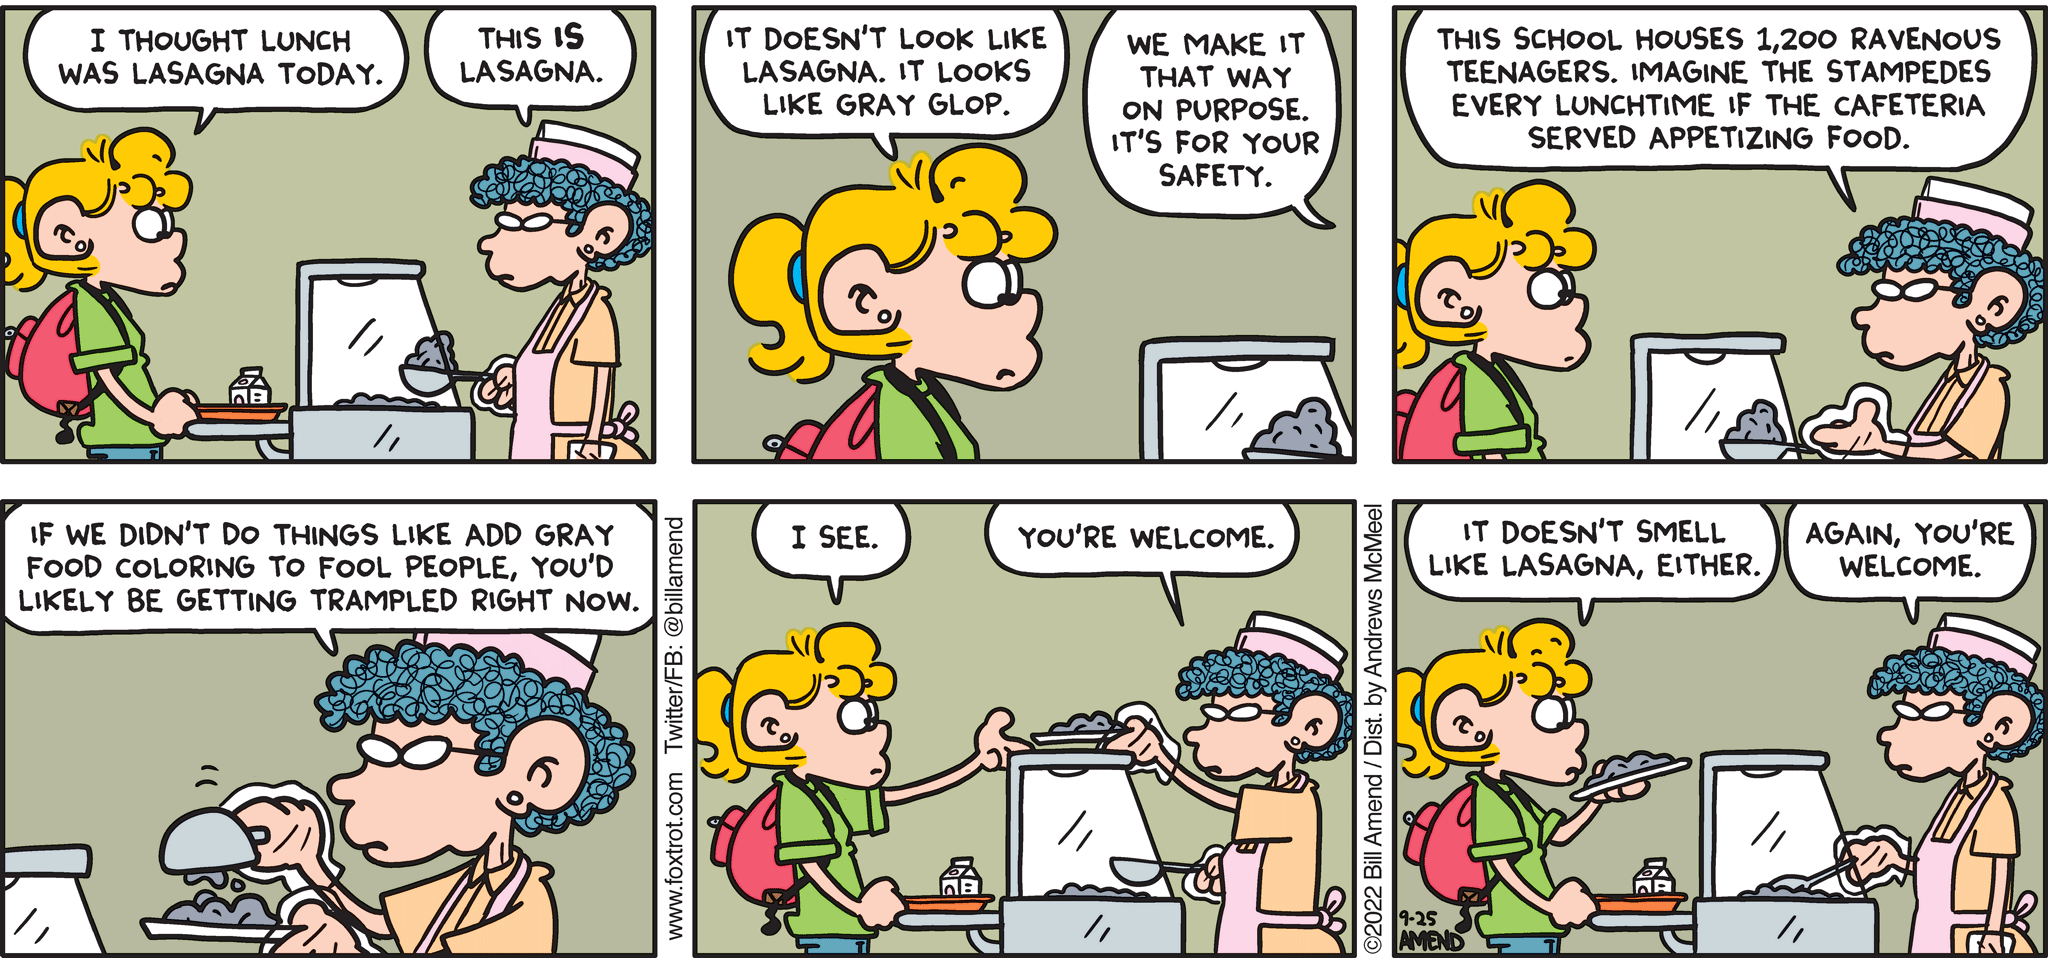 FoxTrot comic strip by Bill Amend - "Safety First" published September 25, 2022 - Transcript: Paige Fox: I thought lunch was lasagna today. Lunch Lady: This IS lasagna. Paige Fox: It doesn't look like lasagna. It looks like gray glop. Lunch Lady: We make it that way on purpose. It's for your safety. This school houses 1,200 ravenous teenagers. Imagine the stampedes every lunchtime if the cafeteria served appetizing food. If we didn't do things like add gray food coloring to fool people, you'd likely be getting trampled right now. Paige Fox: I see. Lunch Lady: You're welcome. Paige Fox: It doesn't smell like lasagna, either. Lunch Lady: Again, you're welcome.